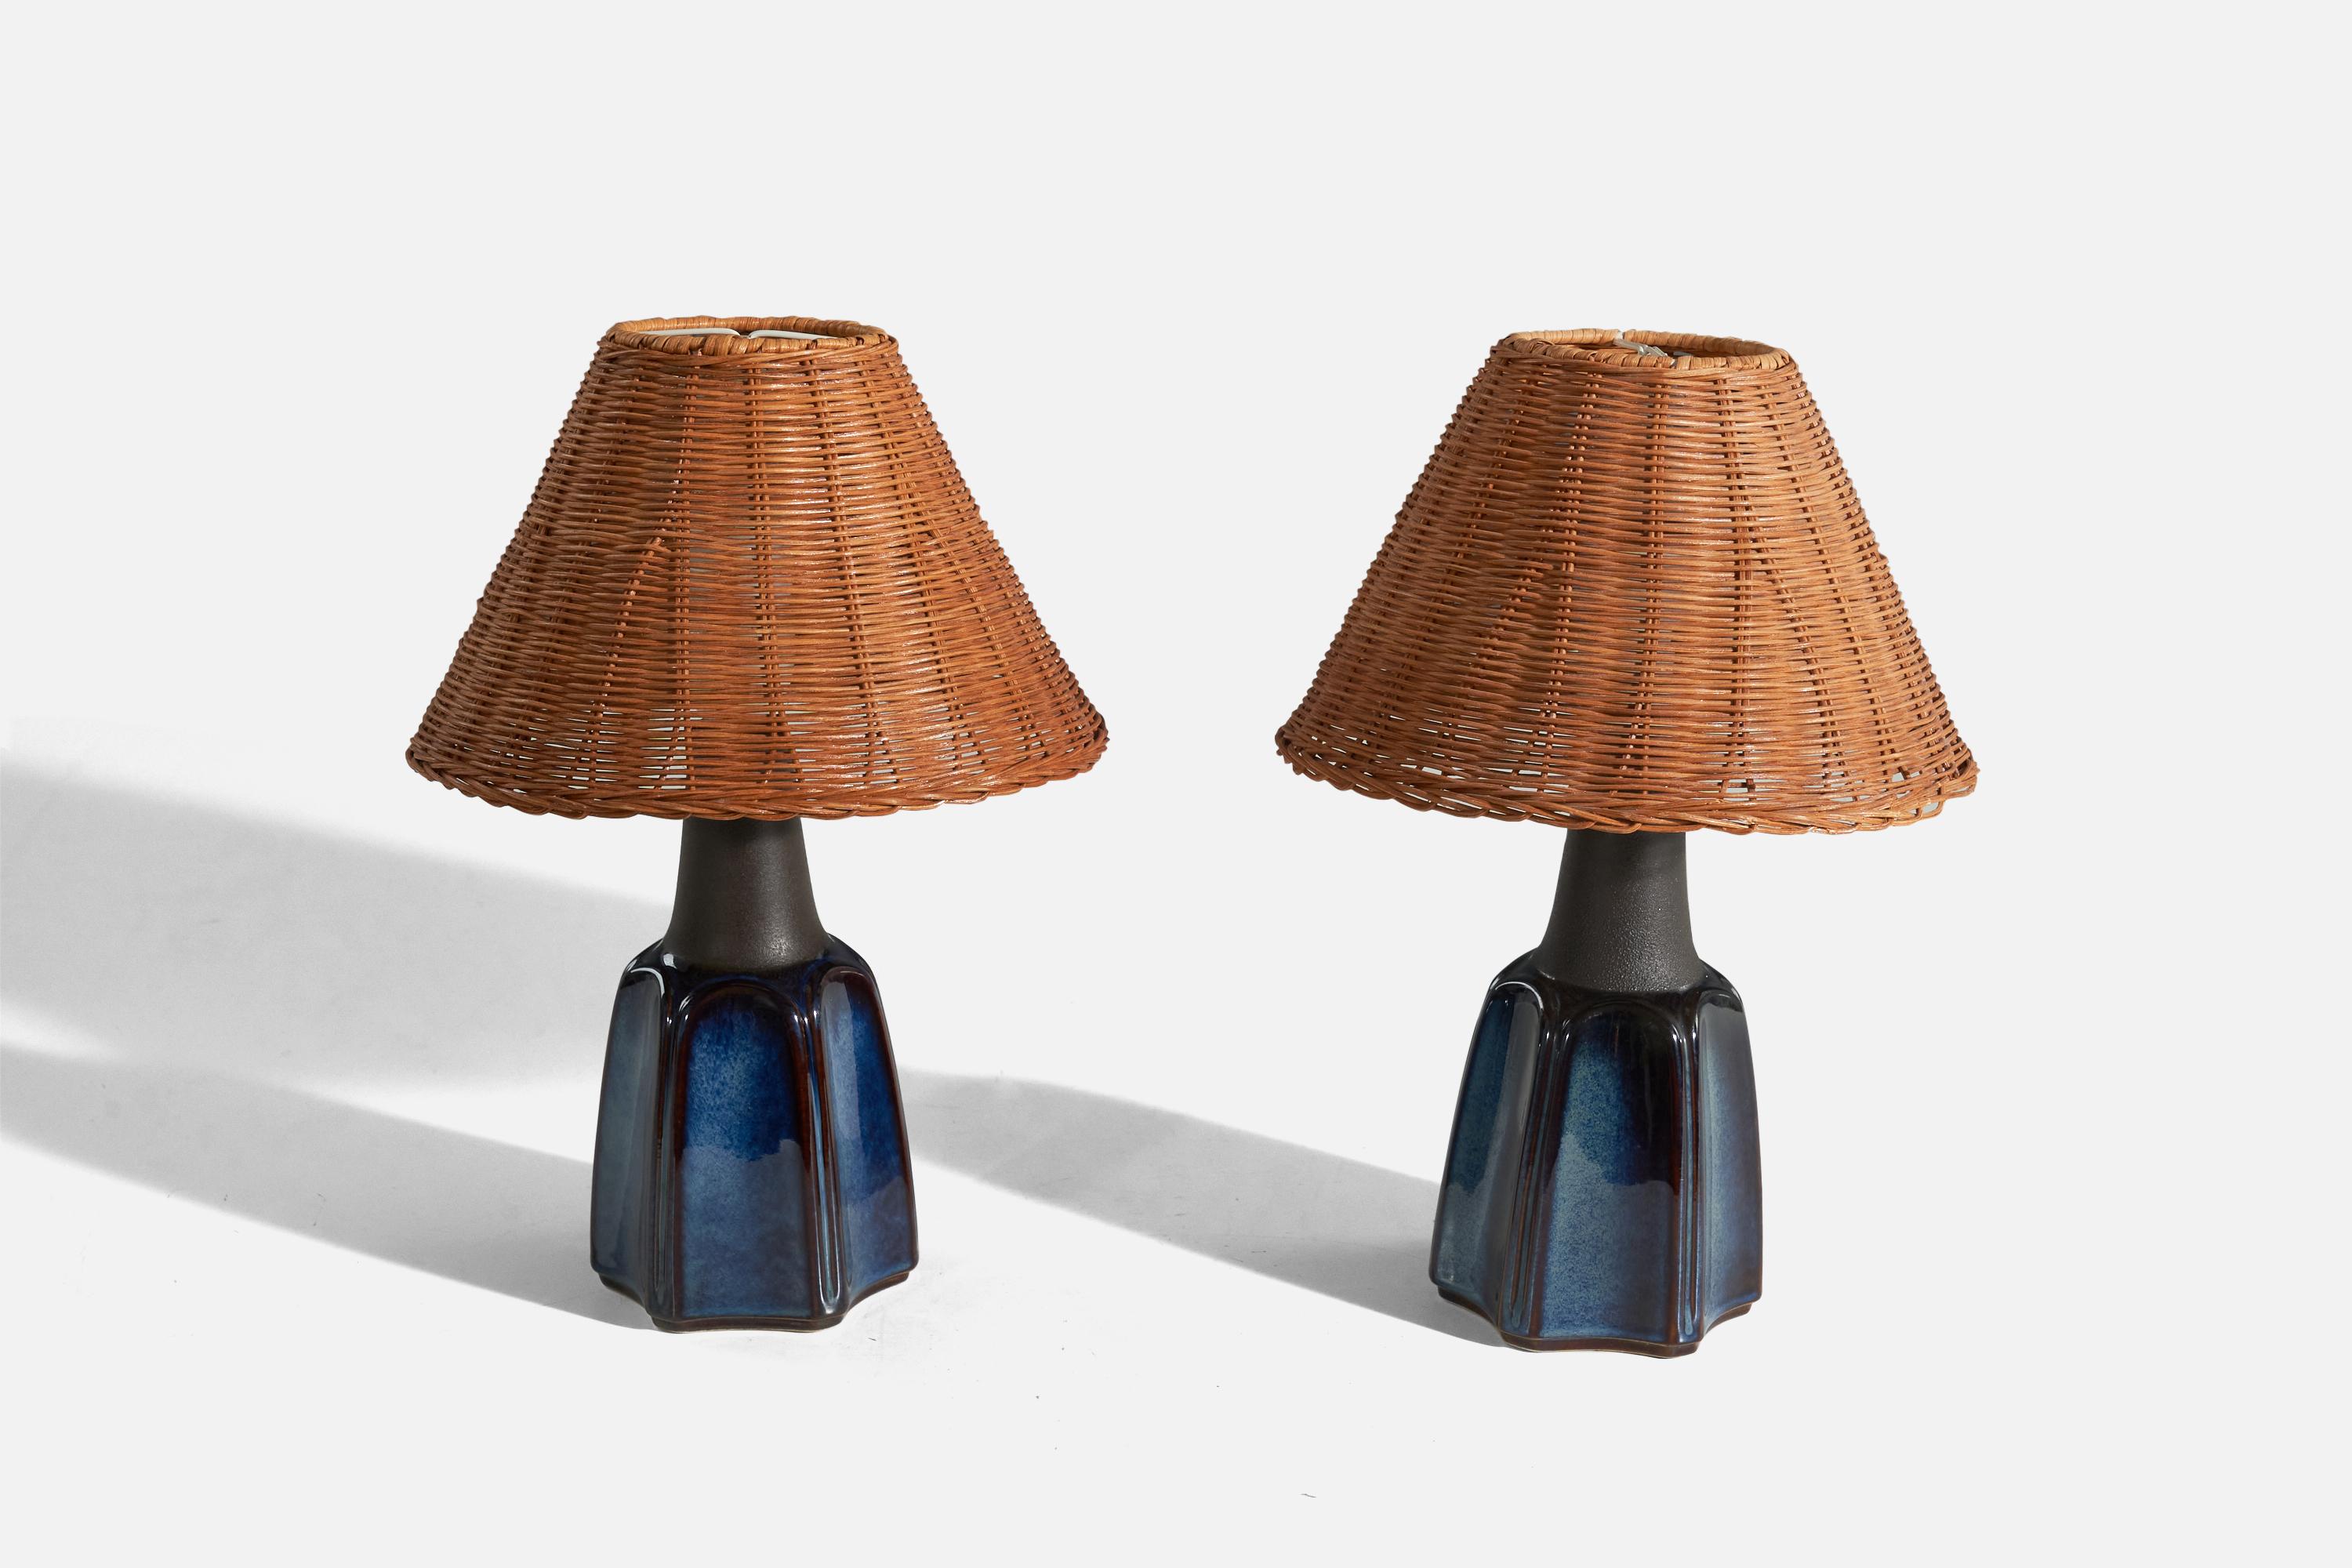 A pair of blue, glazed stoneware table lamps designed and produced by Søholm Stentøj, Bornholm, Denmark, 1960s. 

Sold without lampshades. 
Dimensions of Lamp (inches) : 10 x 4.14 x 4.14 (Height x Width x Depth)
Dimensions of Shade (inches) : 3.5 x